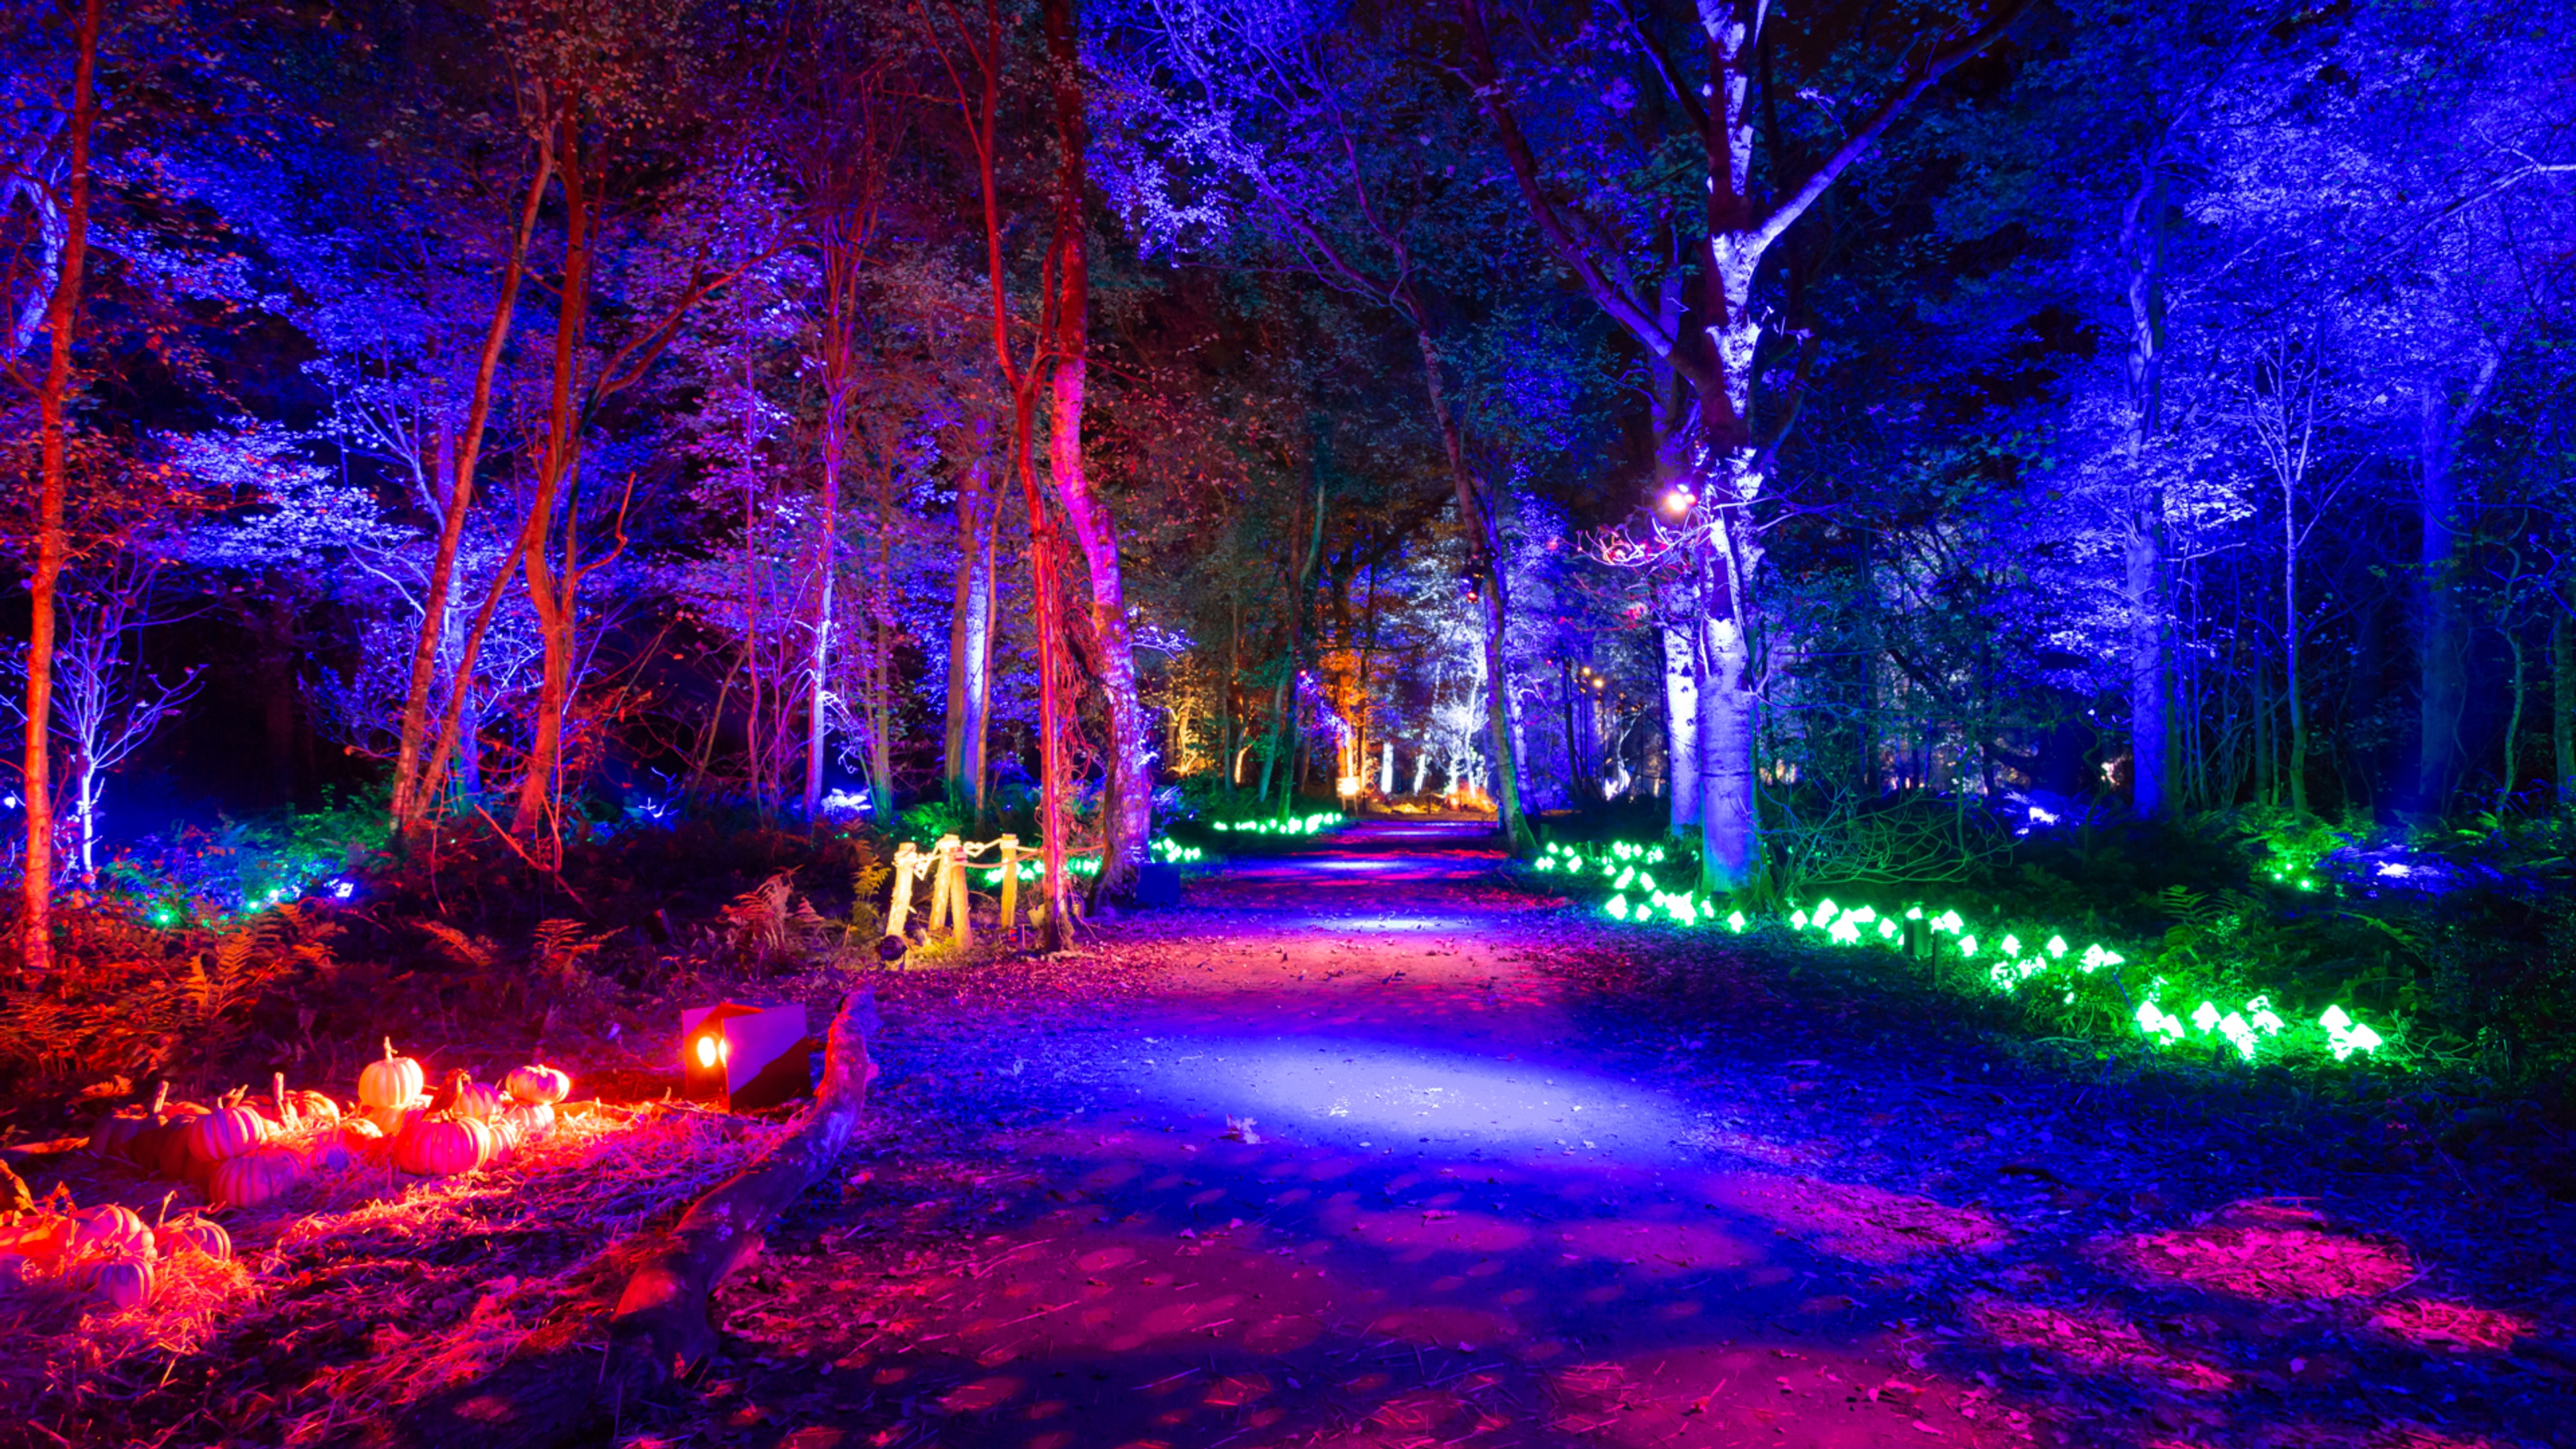 Harry Potter: A Forbidden Forest Experience forest lit up with bright colorful light